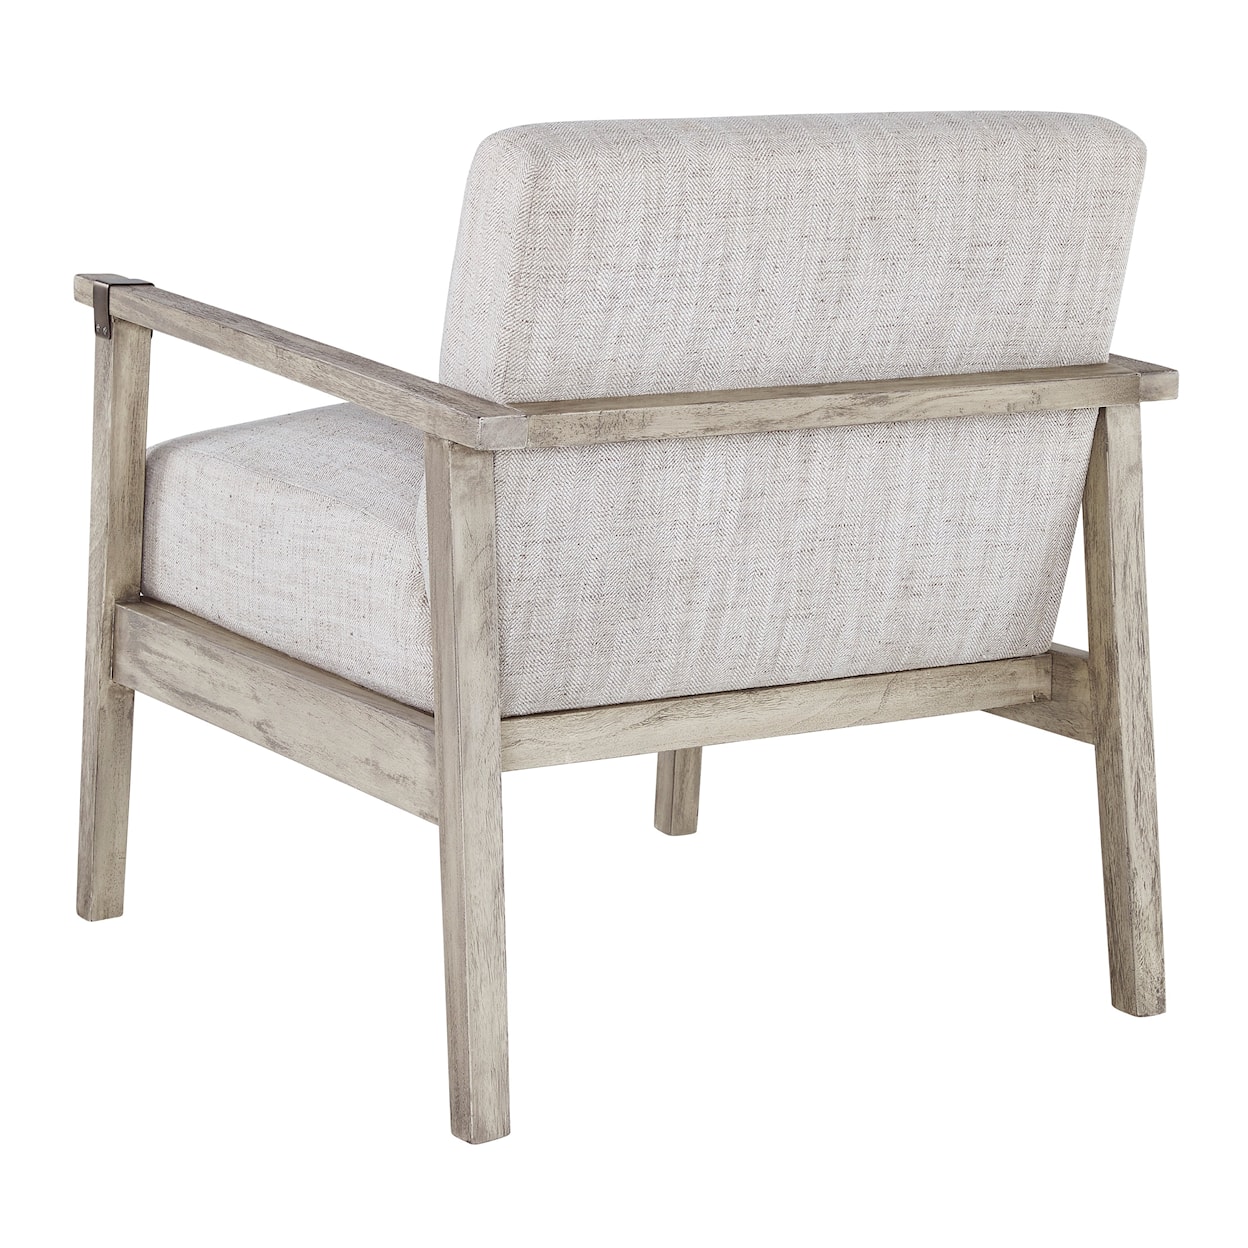 Signature Design by Ashley Dalenville Accent Chair